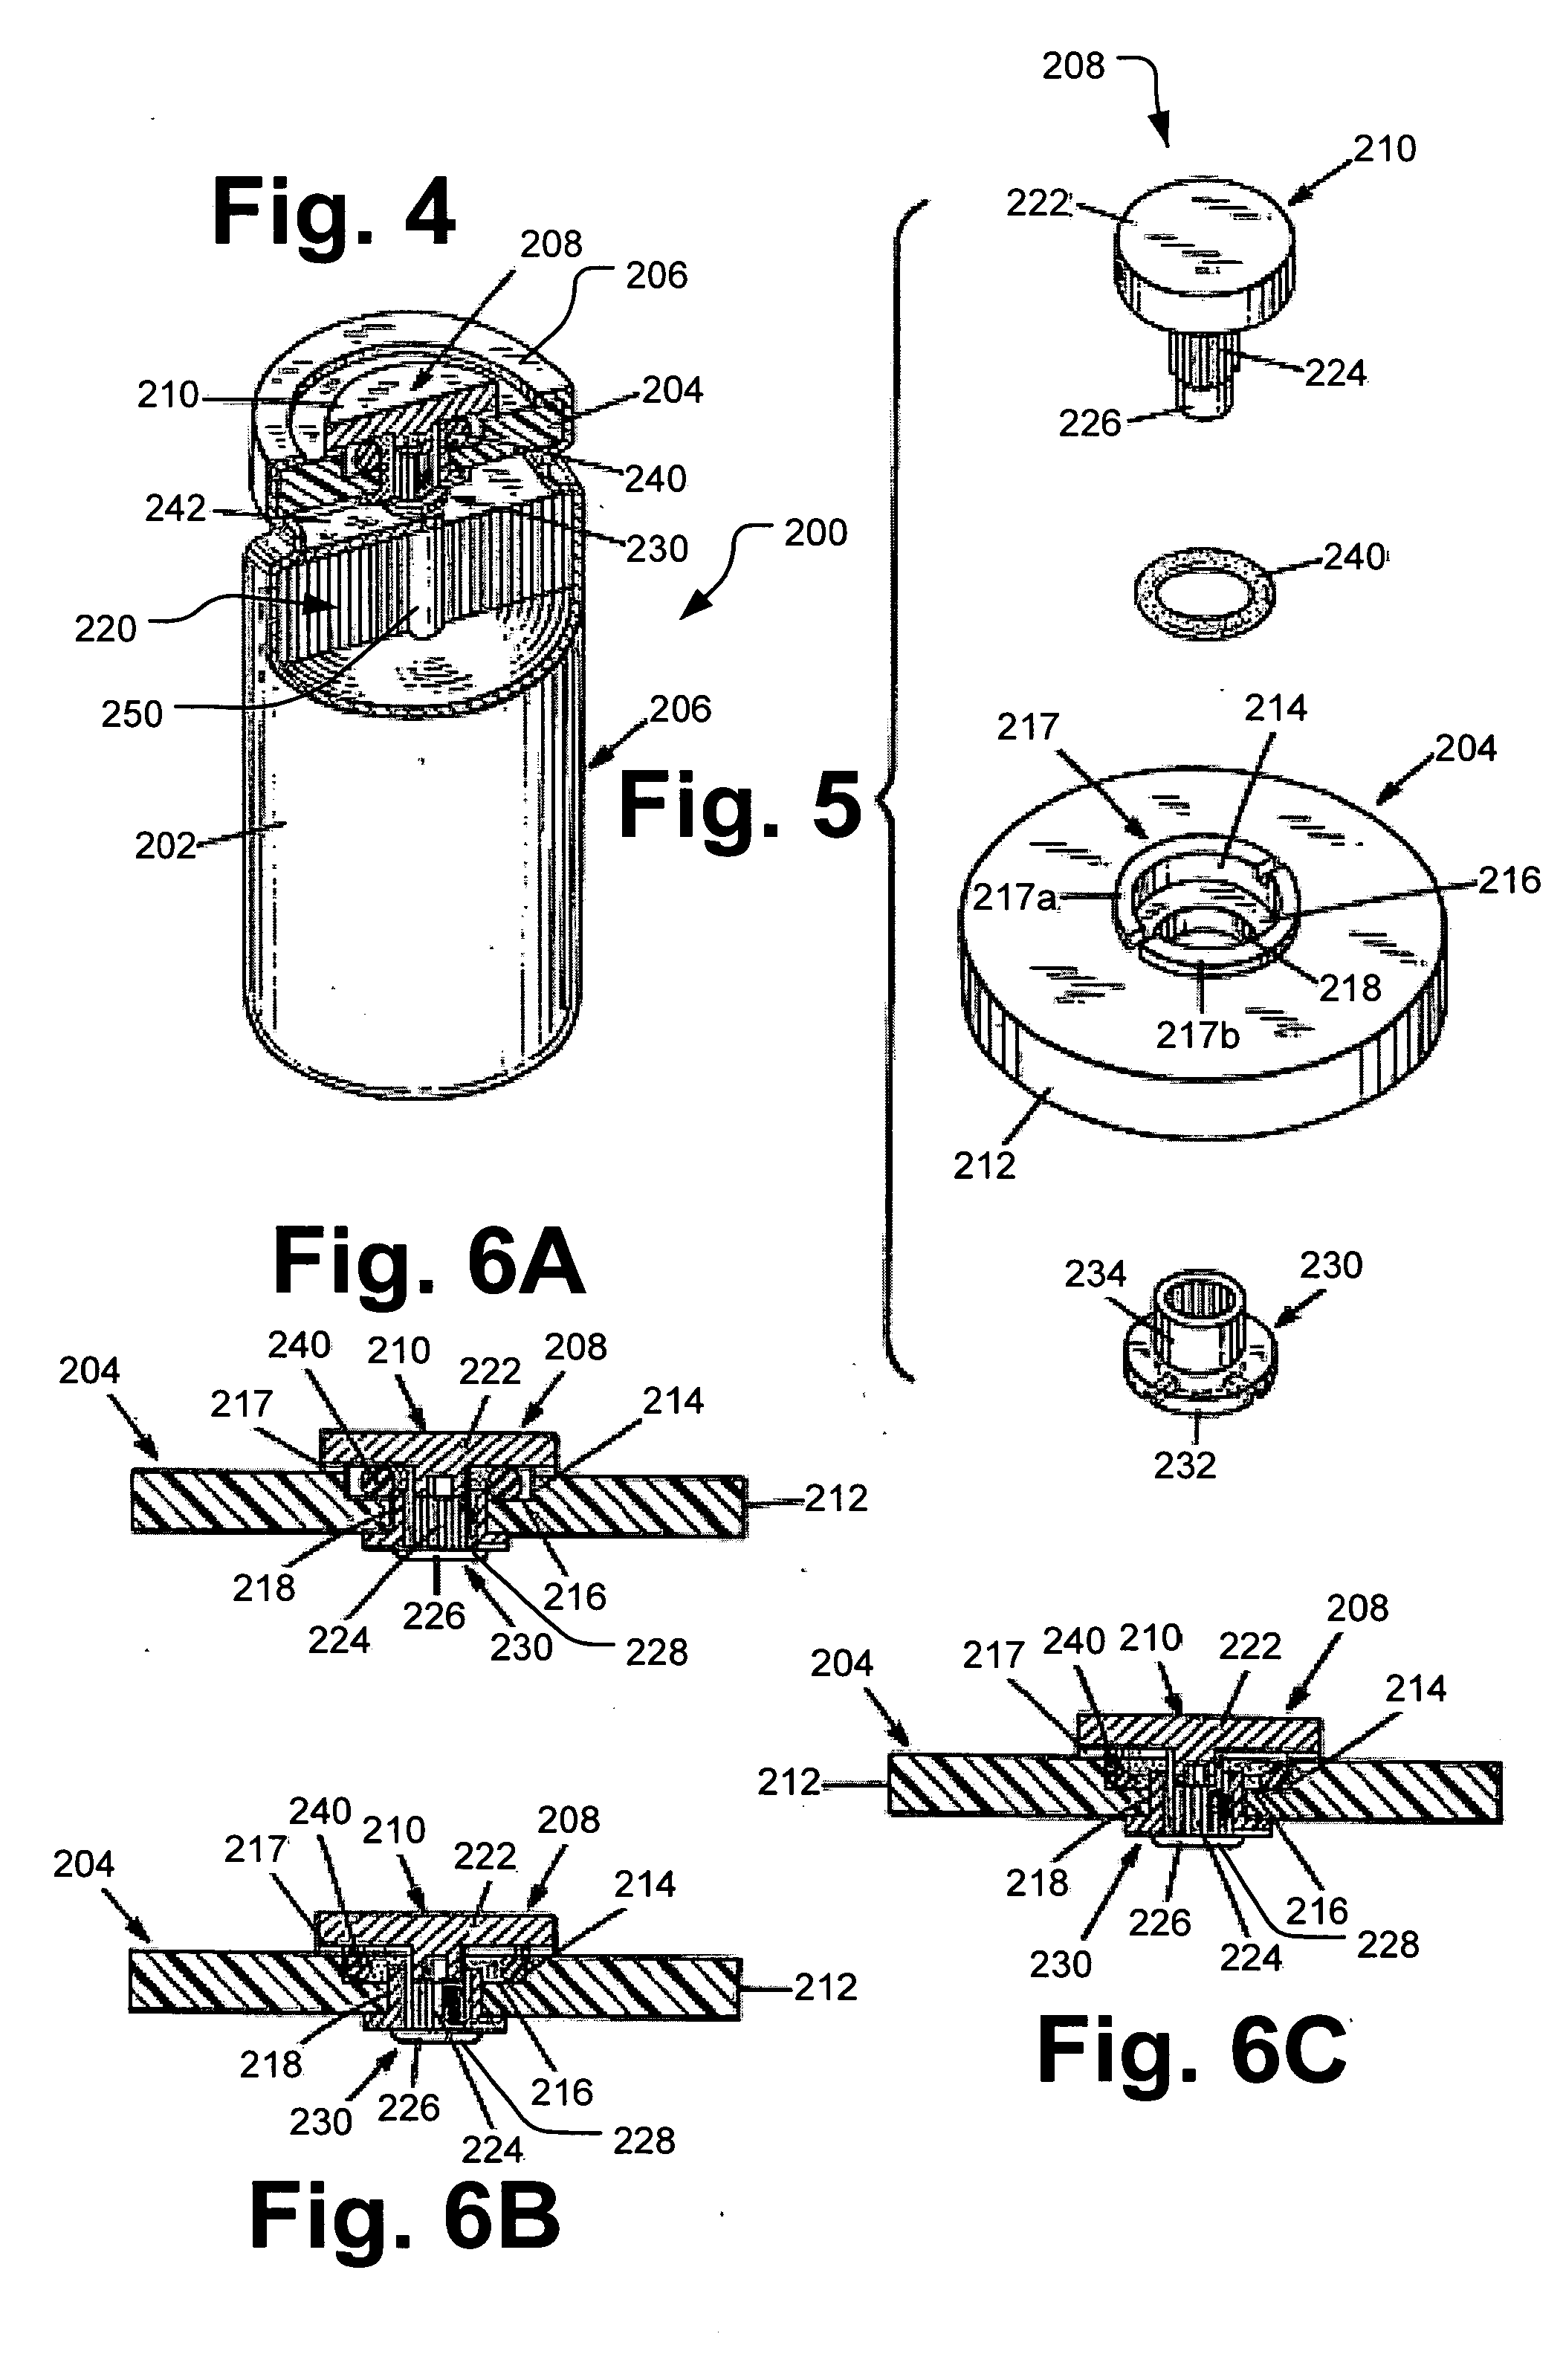 Ultracapacitor pressure control system